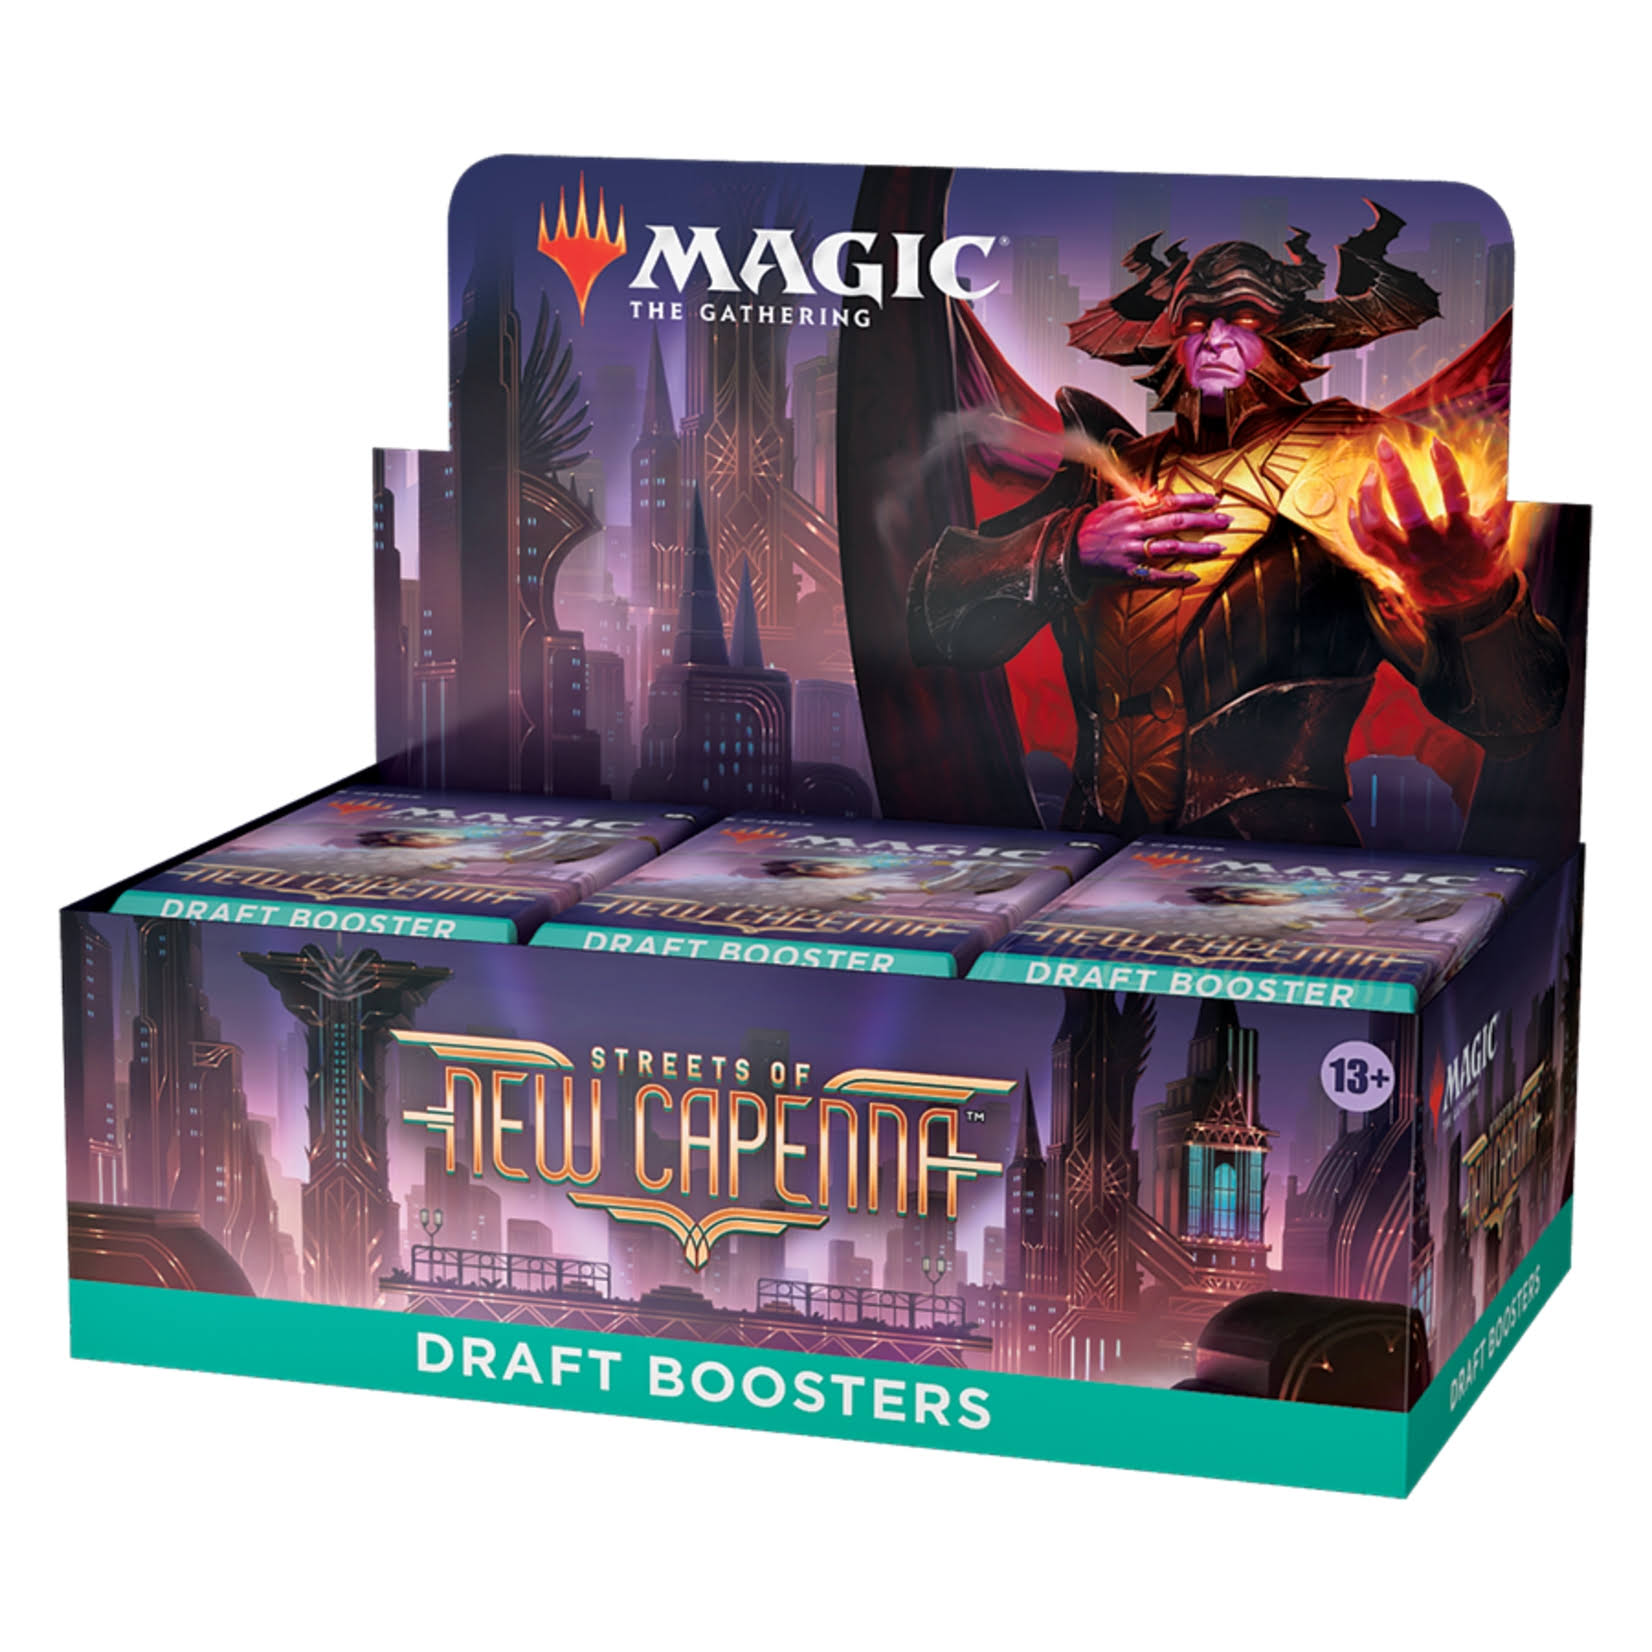 Magic The Gathering - Streets of New Capenna Draft Booster Box